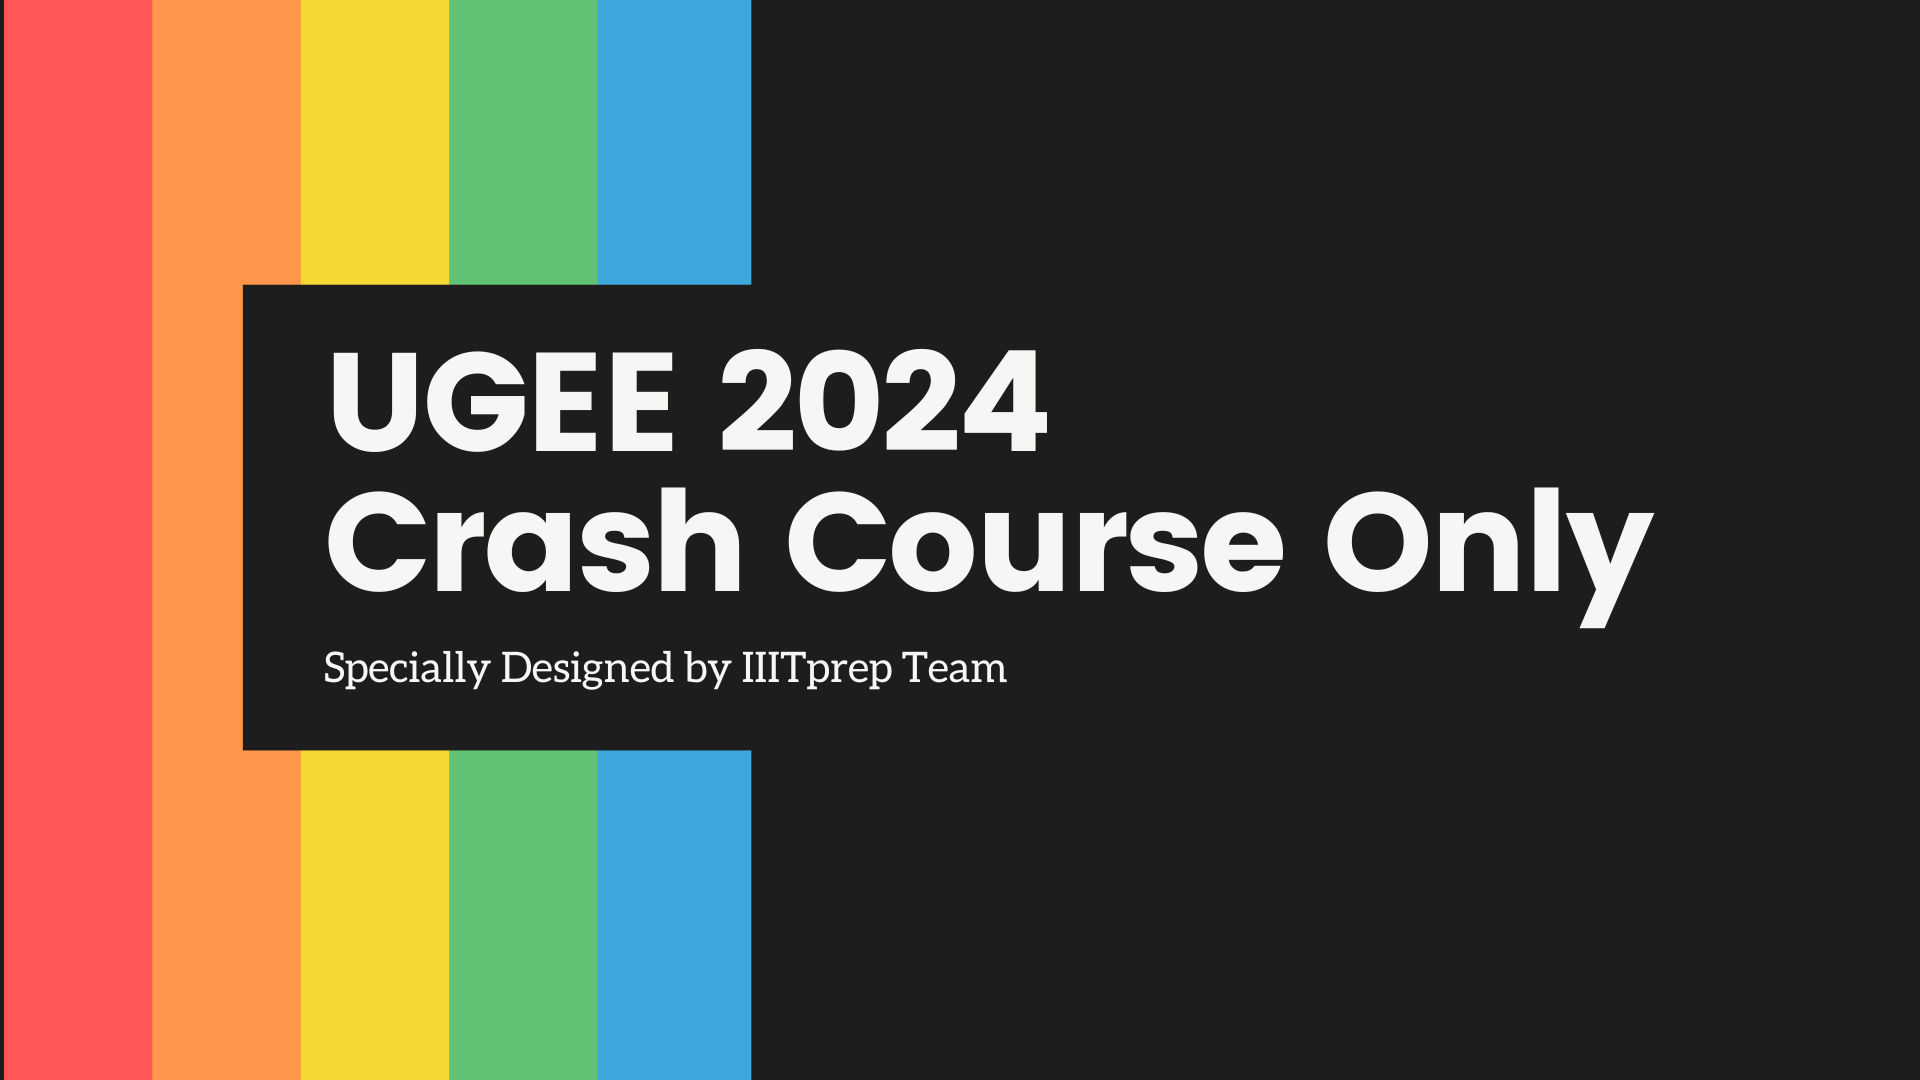 UGEE 2024 Crash Course Only